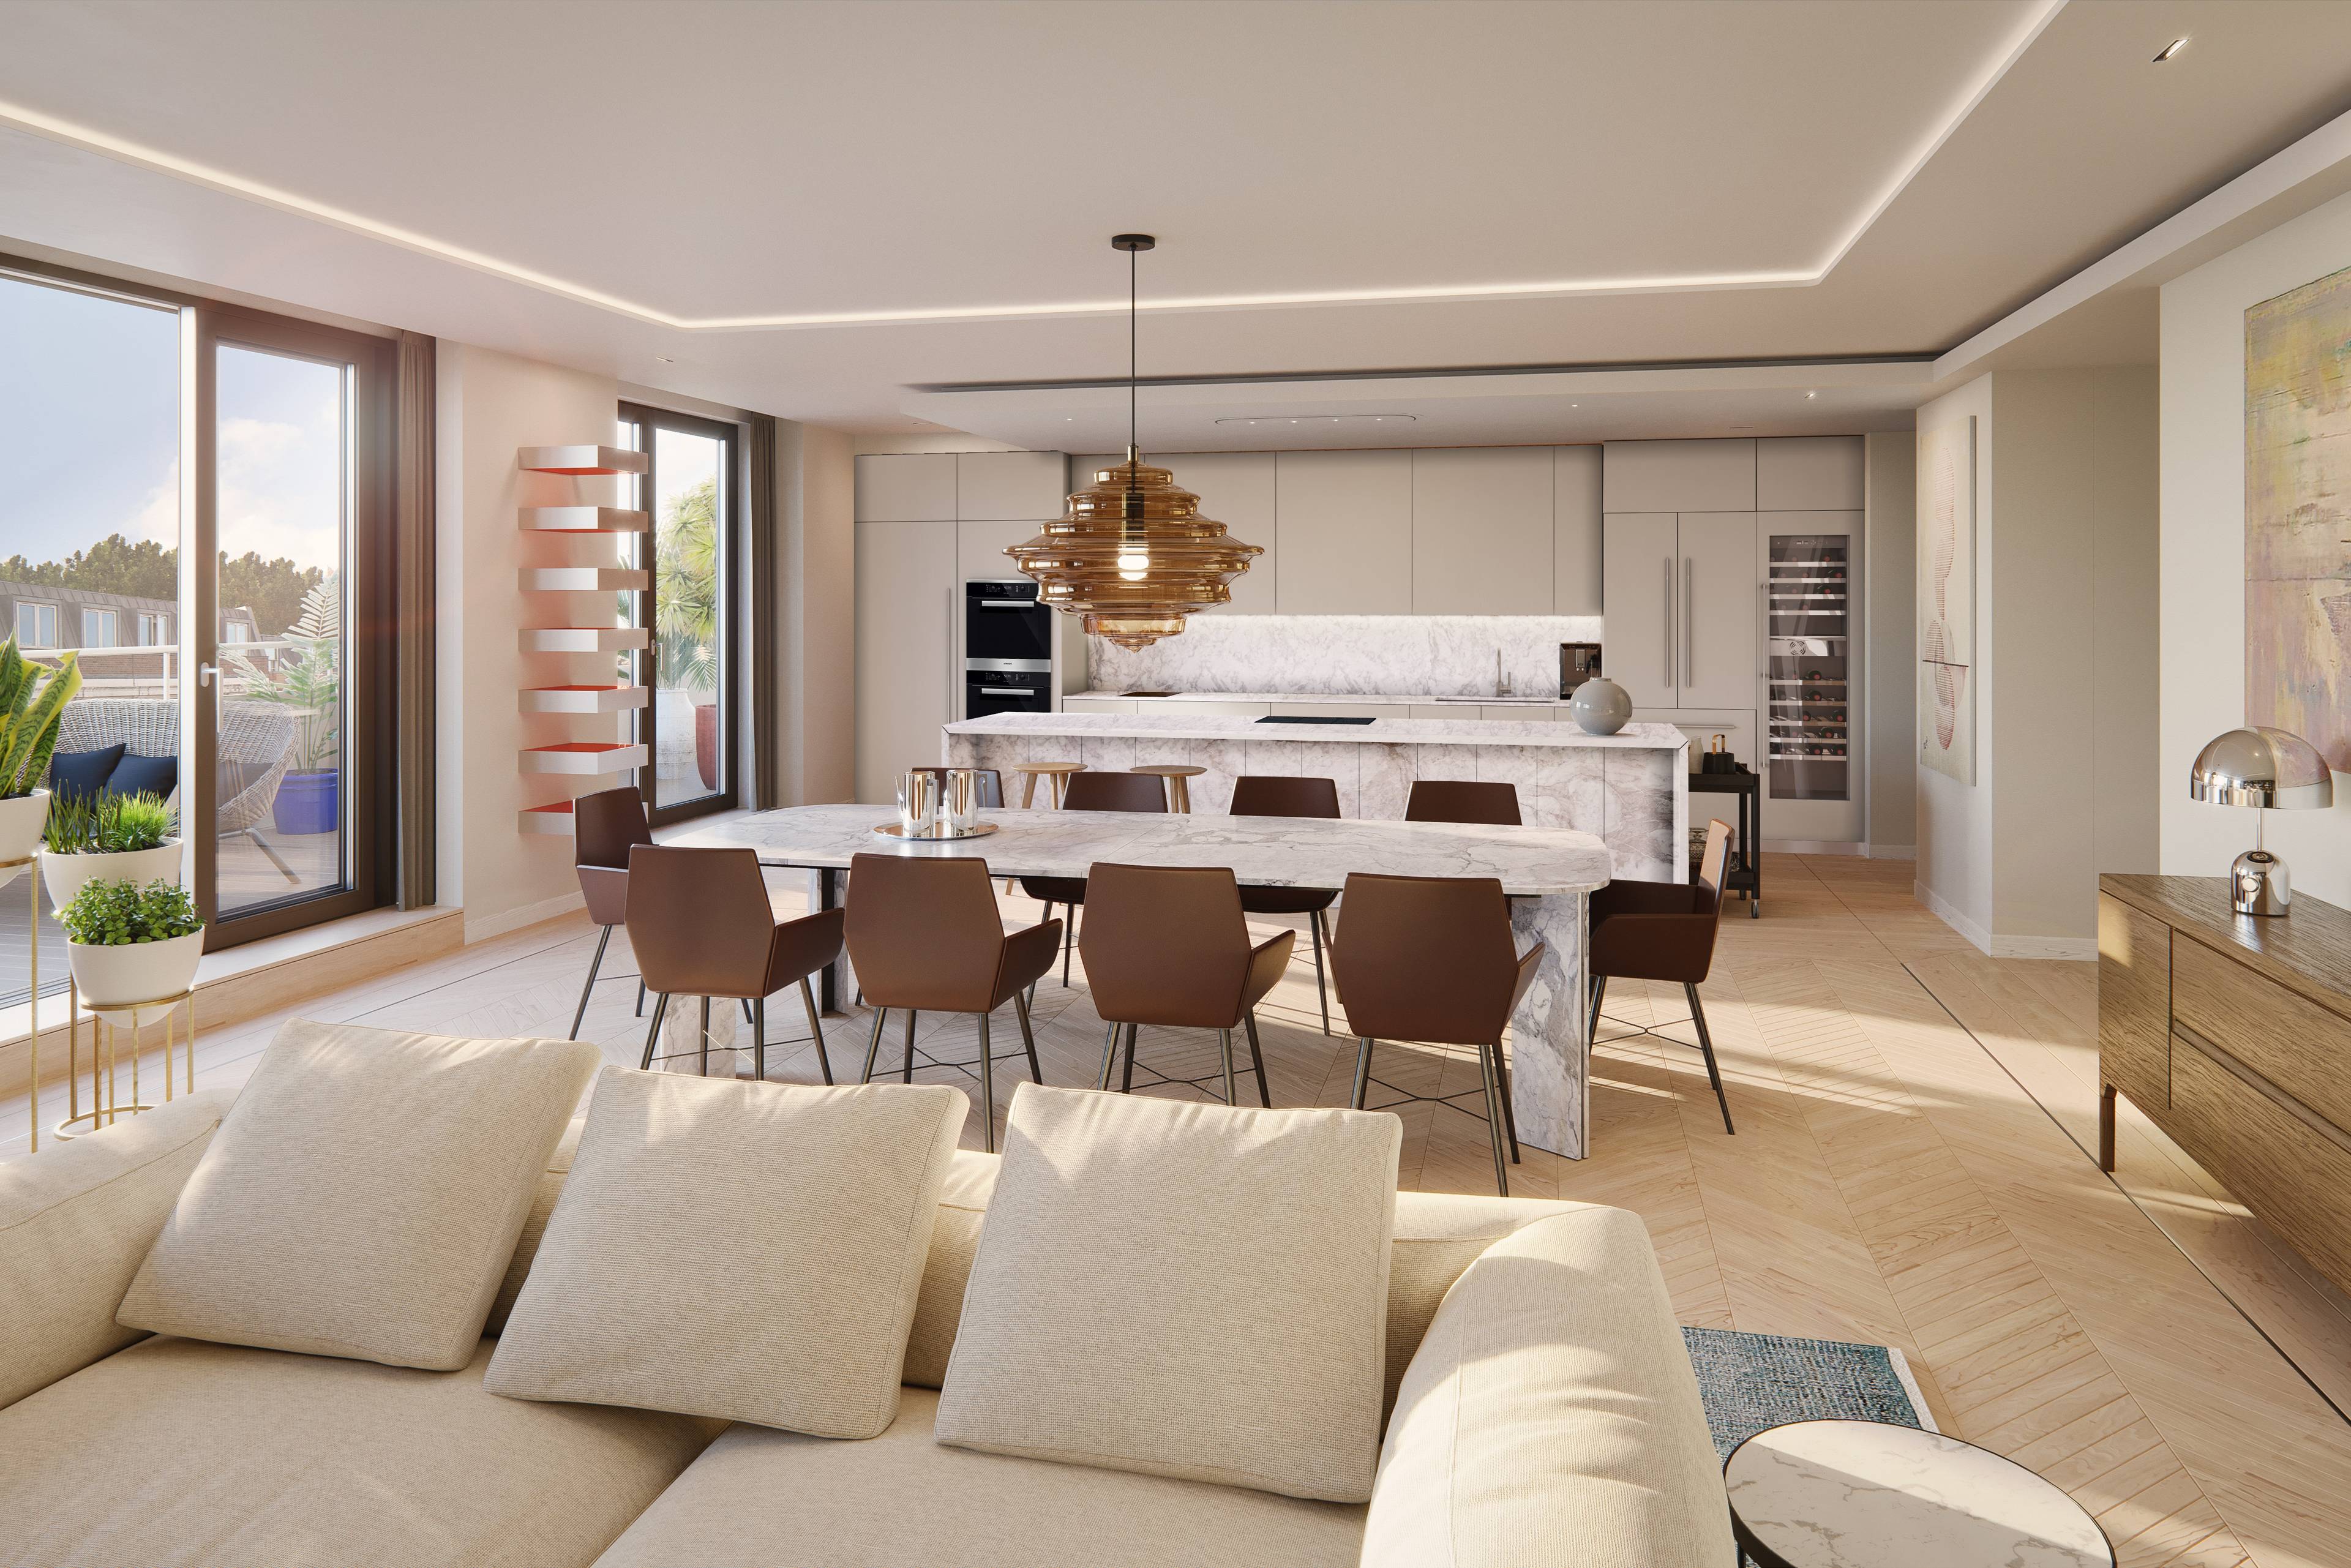 A south-east facing three-bedroom apartment of 2,000+ sqft, in the highly anticipated Marylebone Square Residences, set to be built in the heart of Marylebone Village.